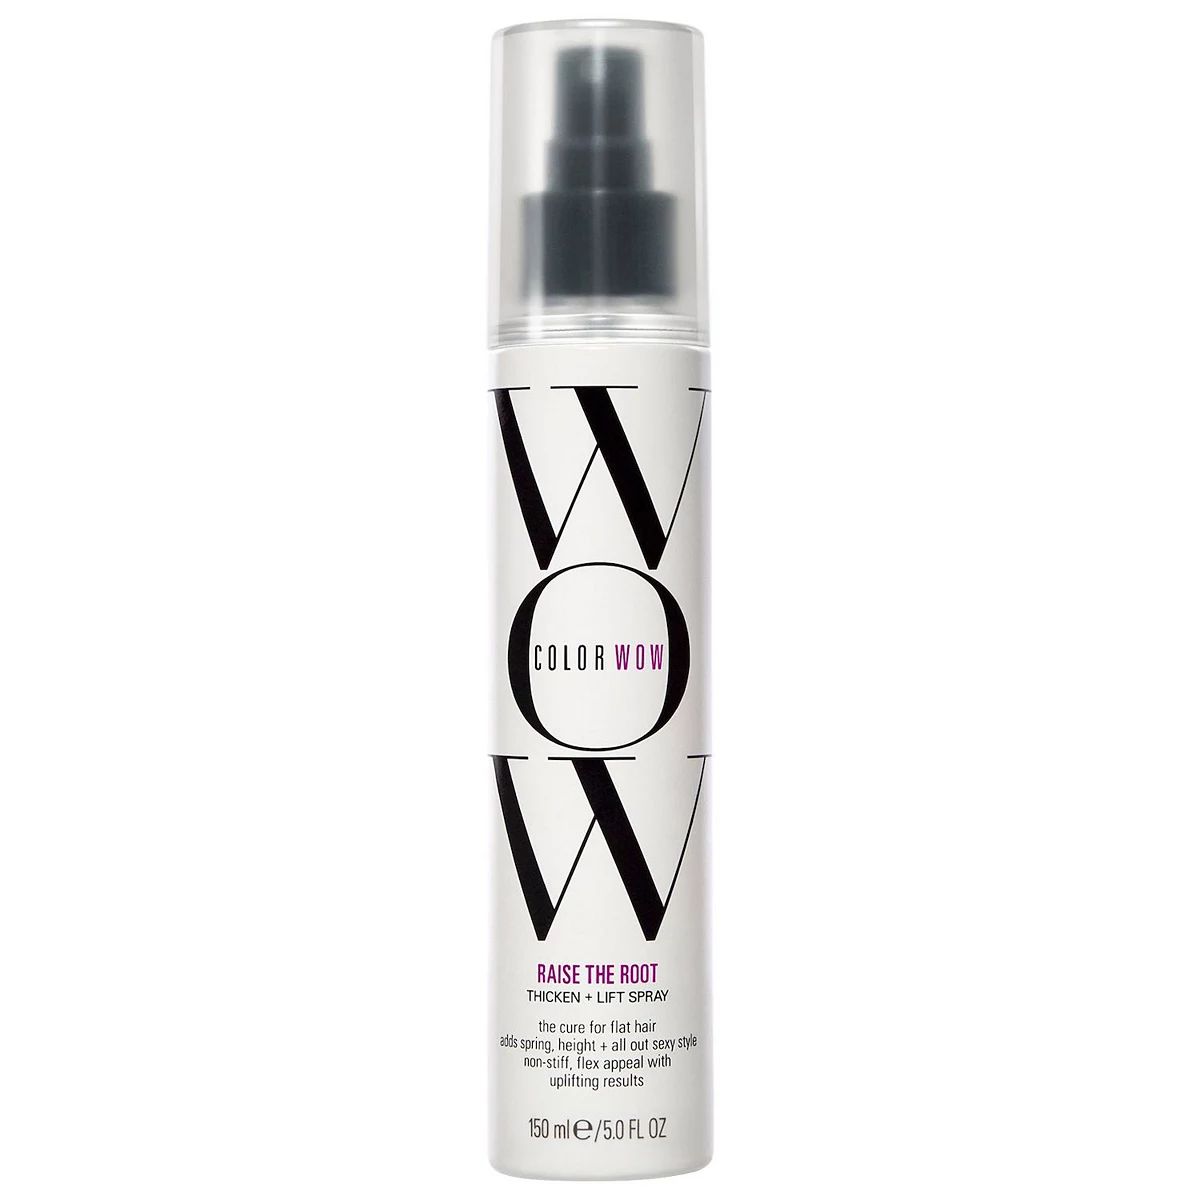 COLOR WOW Raise the Root Thicken and Lift Spray | Kohl's